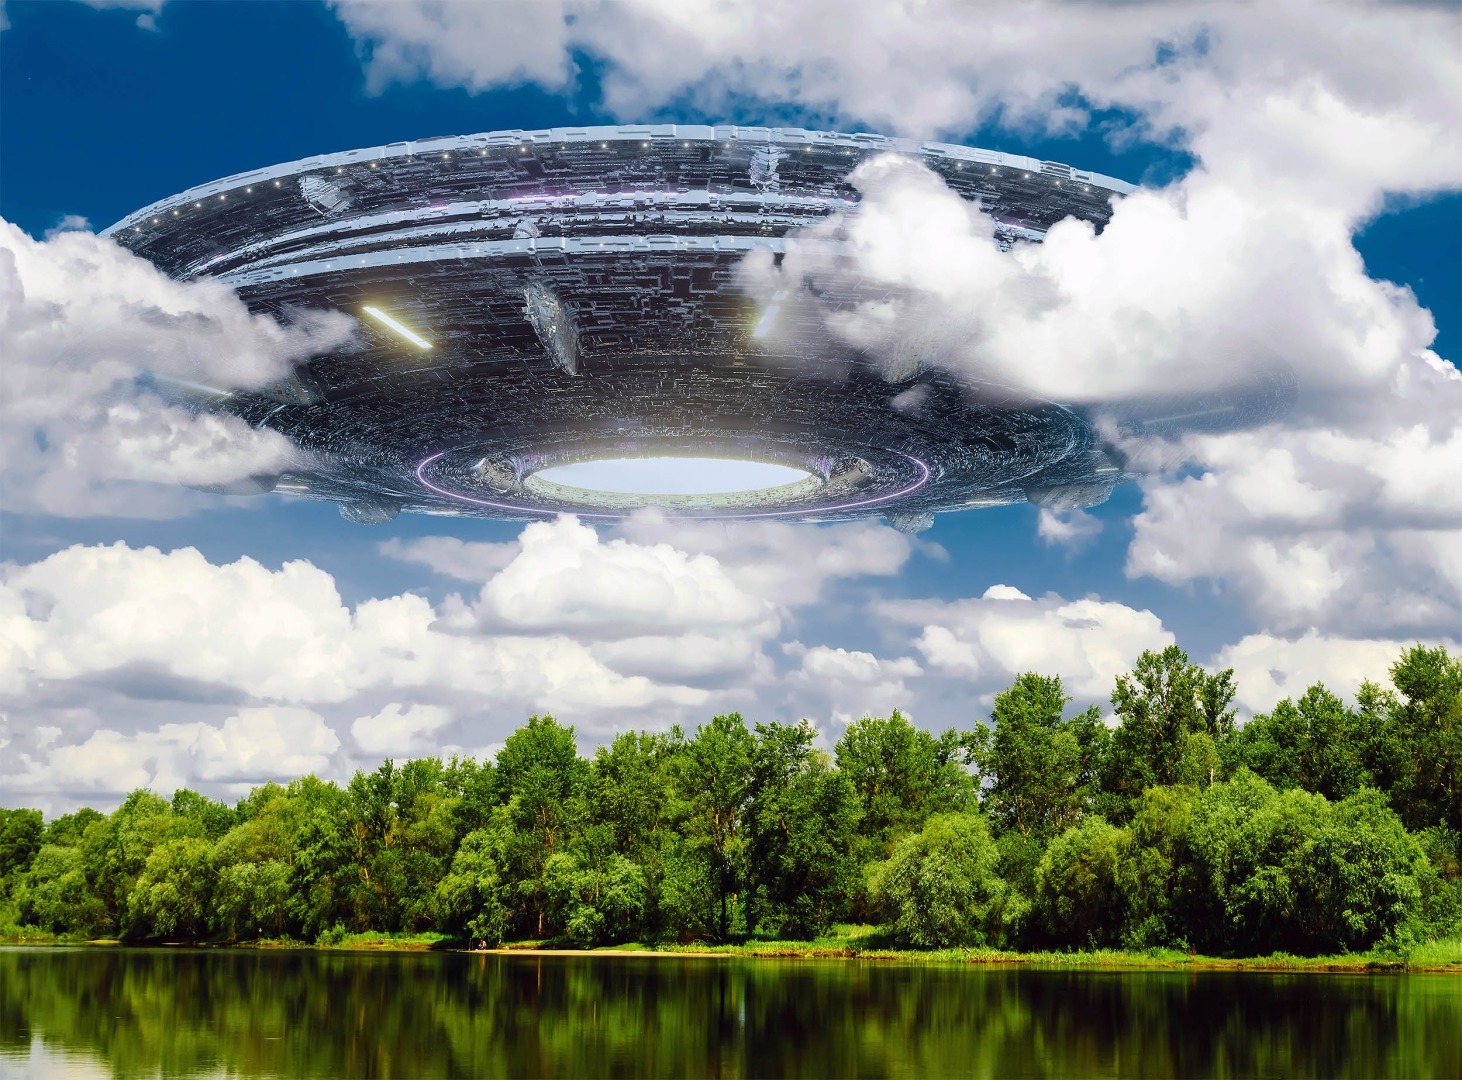 UFO Sightings in 1950s and 60s Linked to US Military Tests